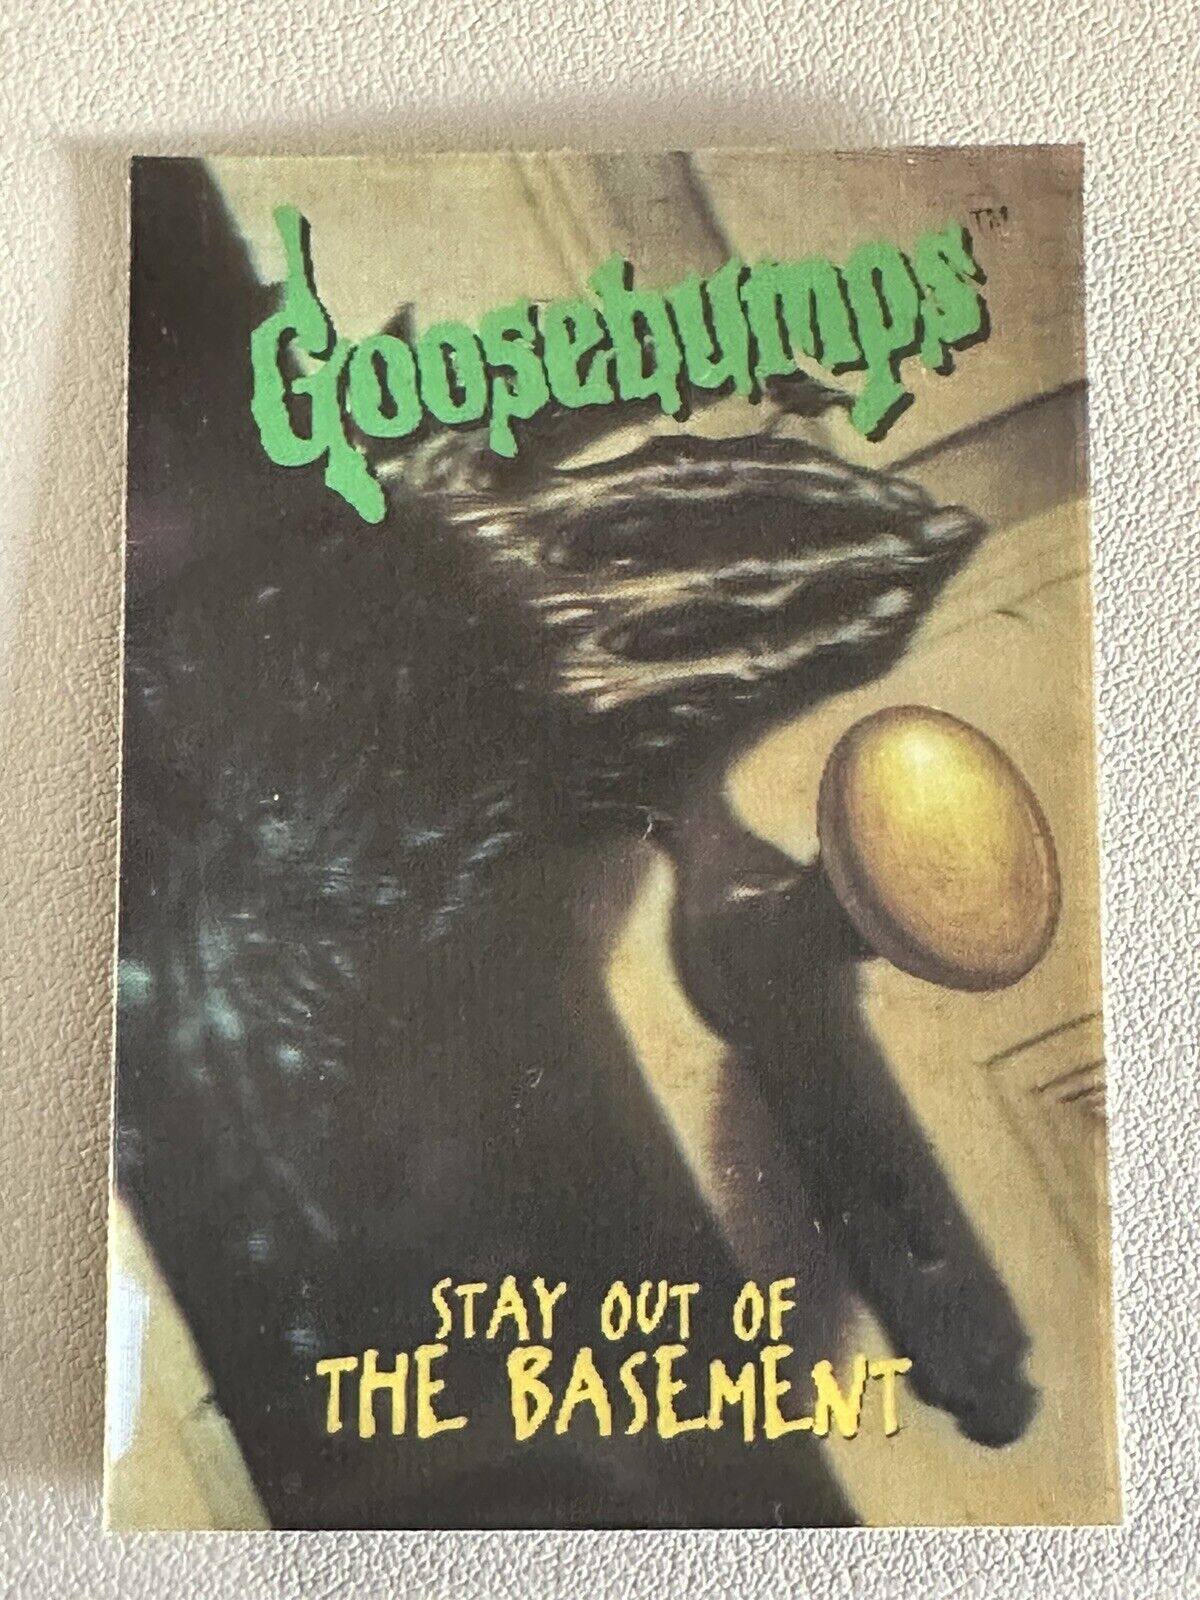 Goosebumps STAY OUT OF THE BASEMENT  R.L. Stine Hologram 3D Card Ex. Condition